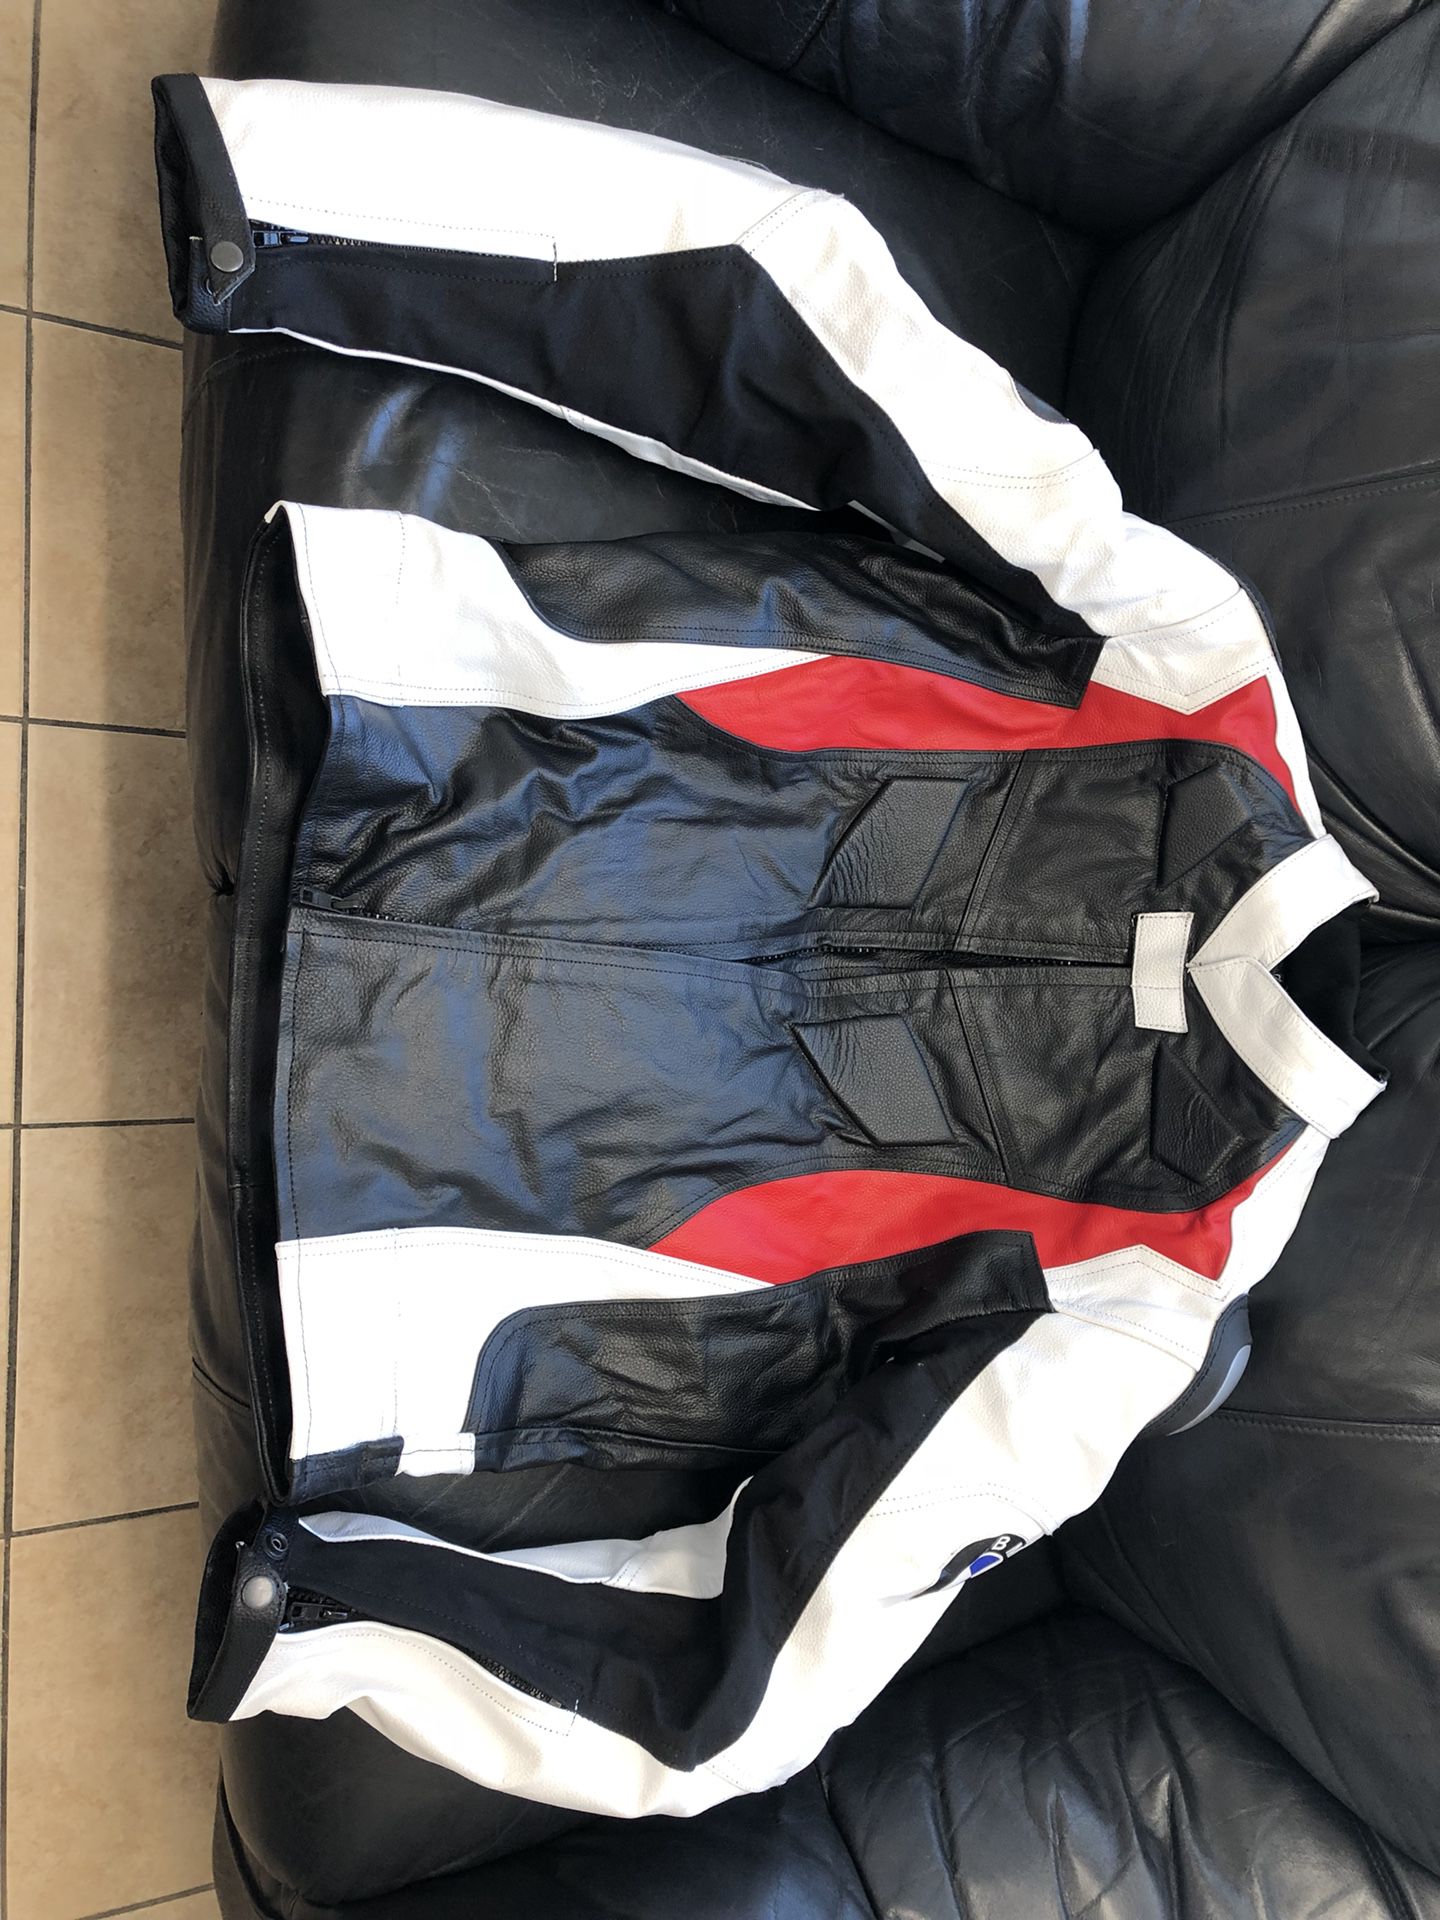 BMW motorcycle jackets